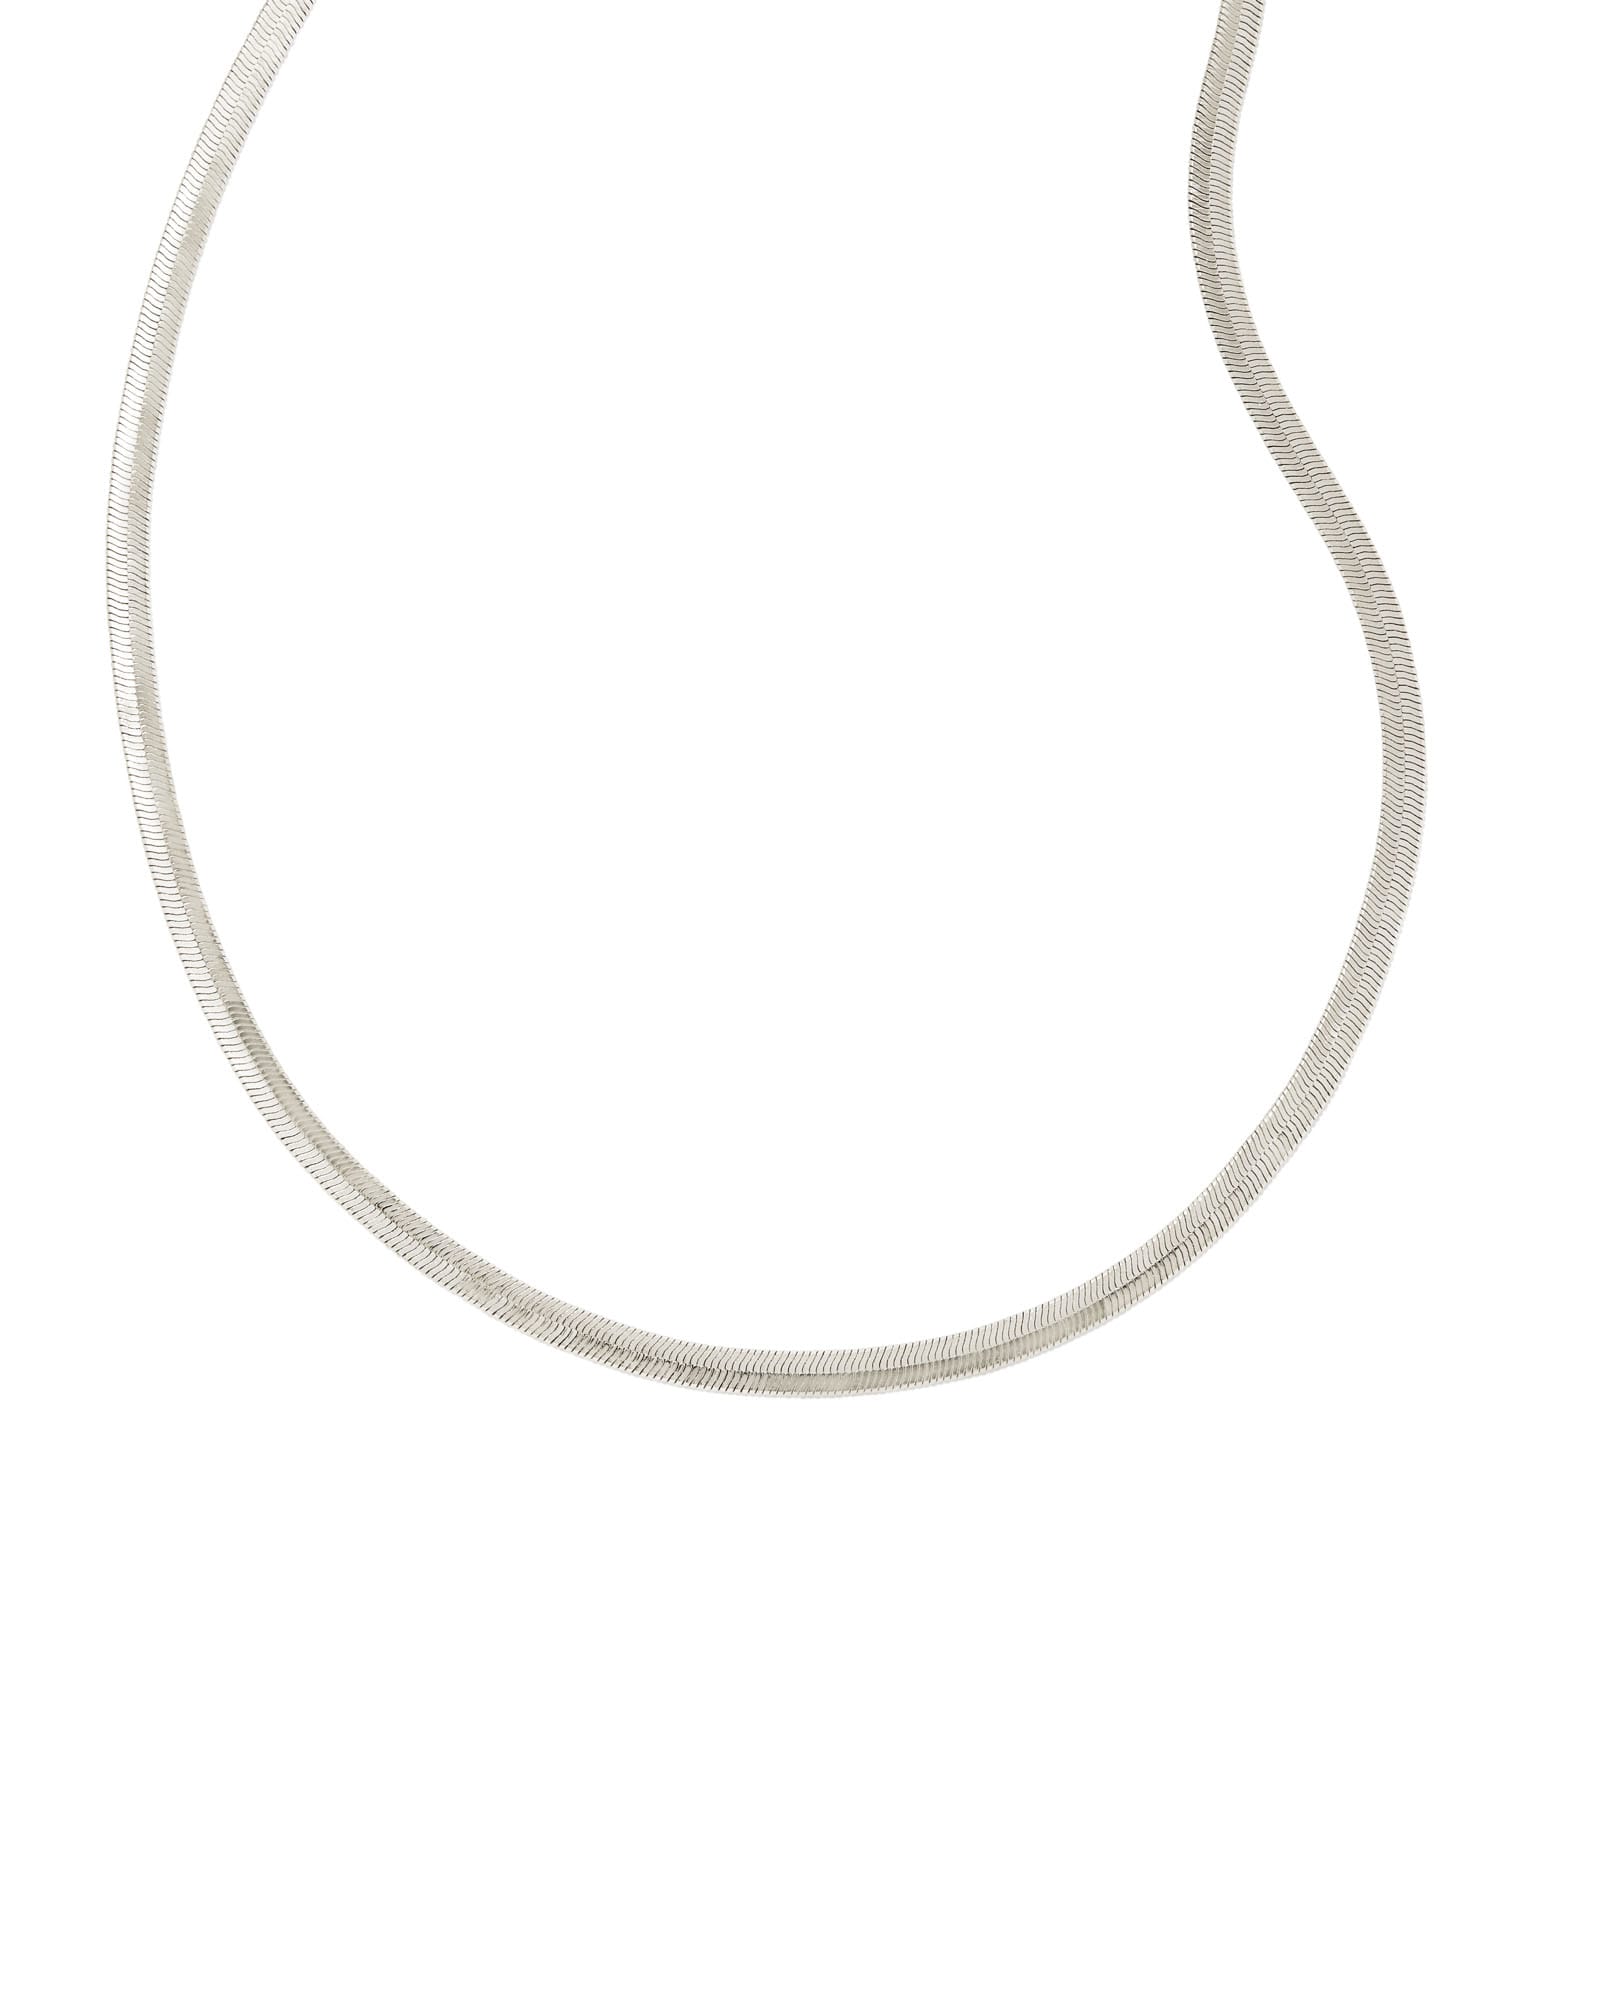 Kendra Scott Kassie Reversible Chain Necklace in Mixed Metal | Plated Brass